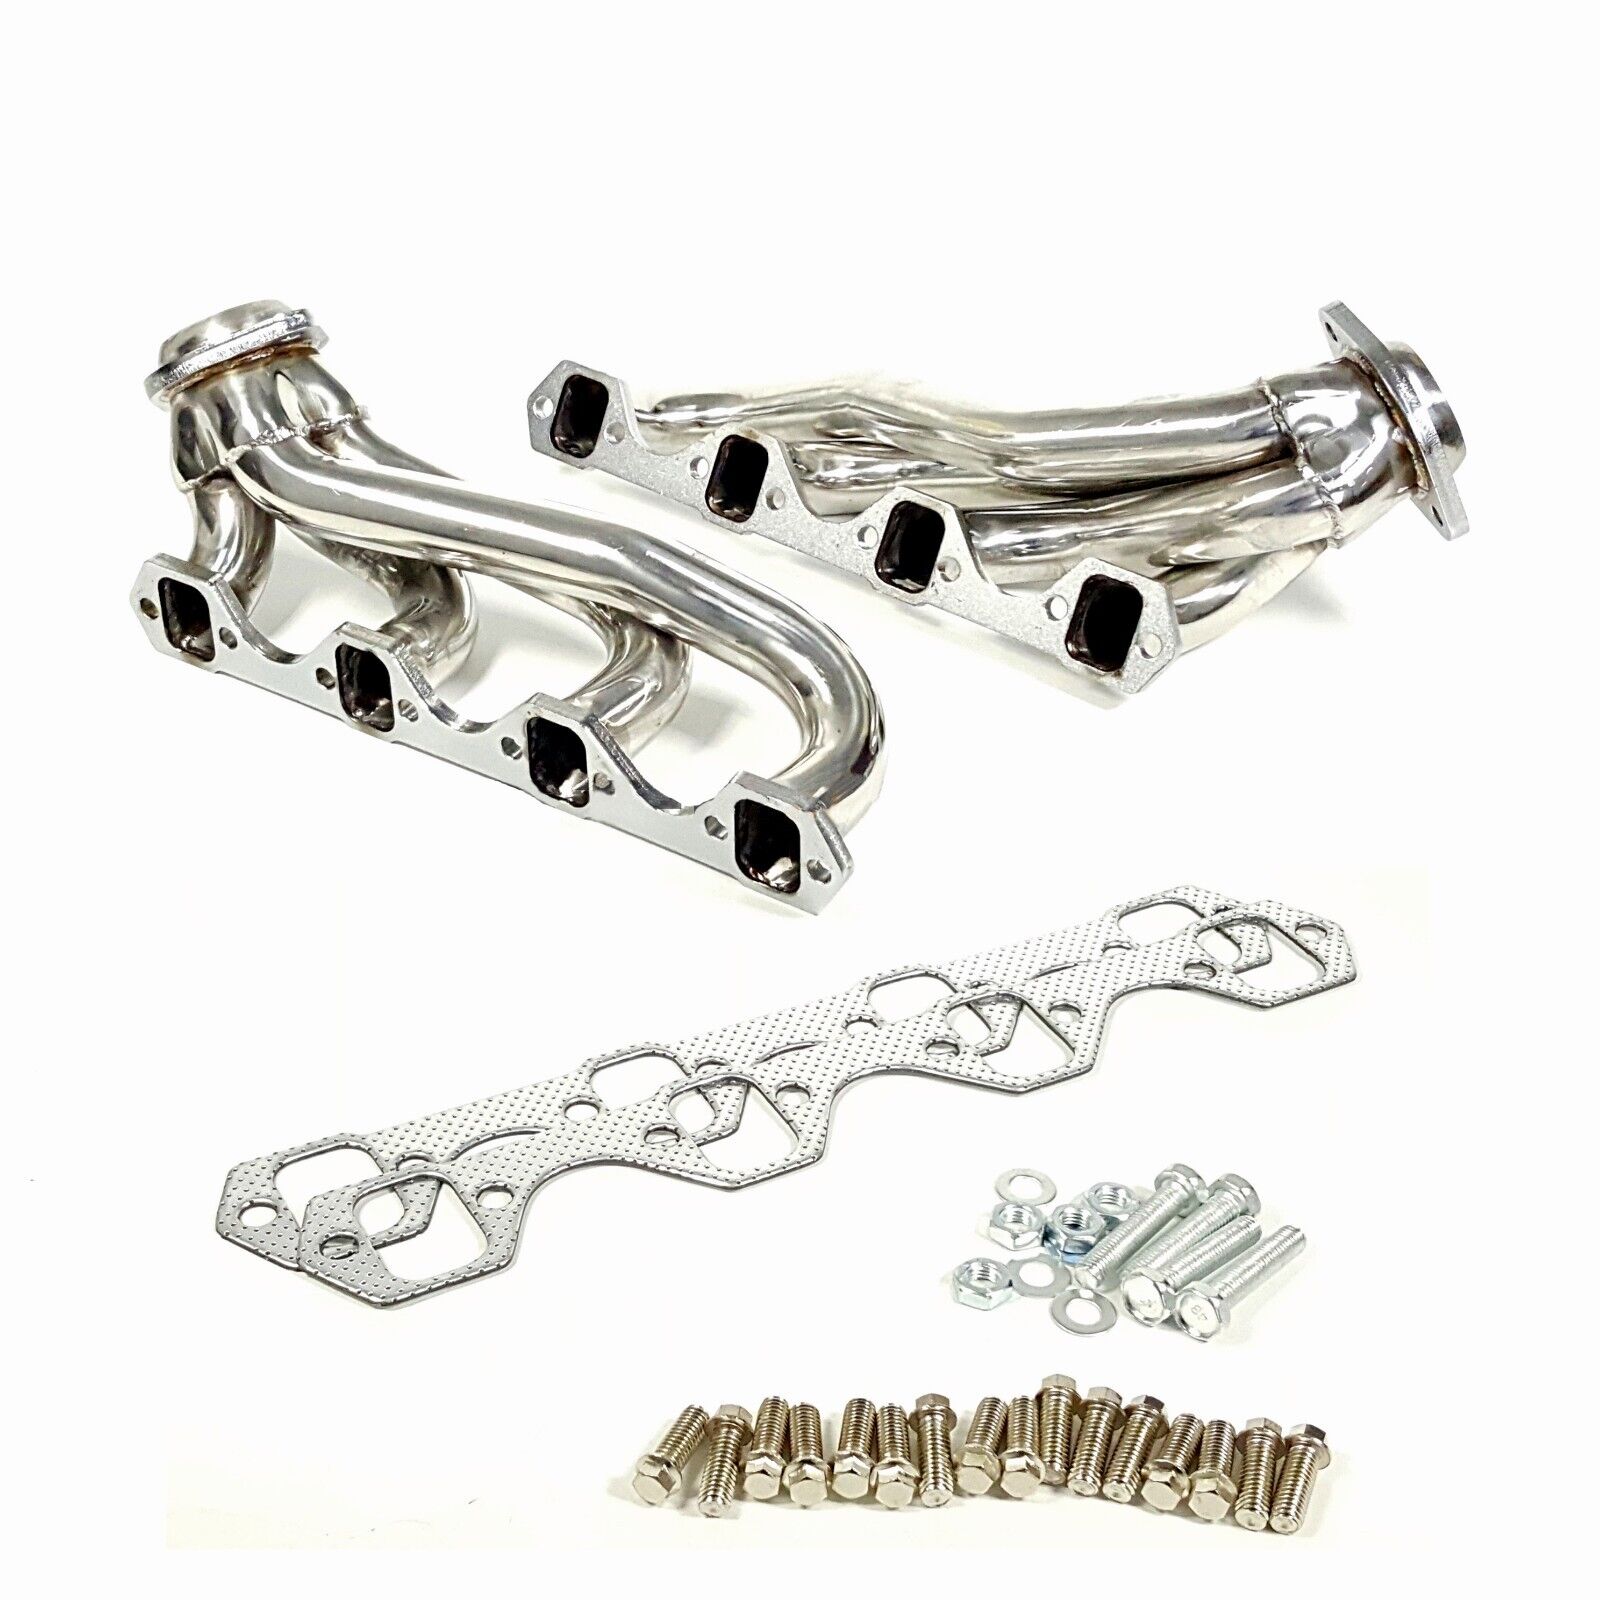 Turbo Exhaust Shorty Headers For Ford Mustang 5.0 L V8 302ci Small Block